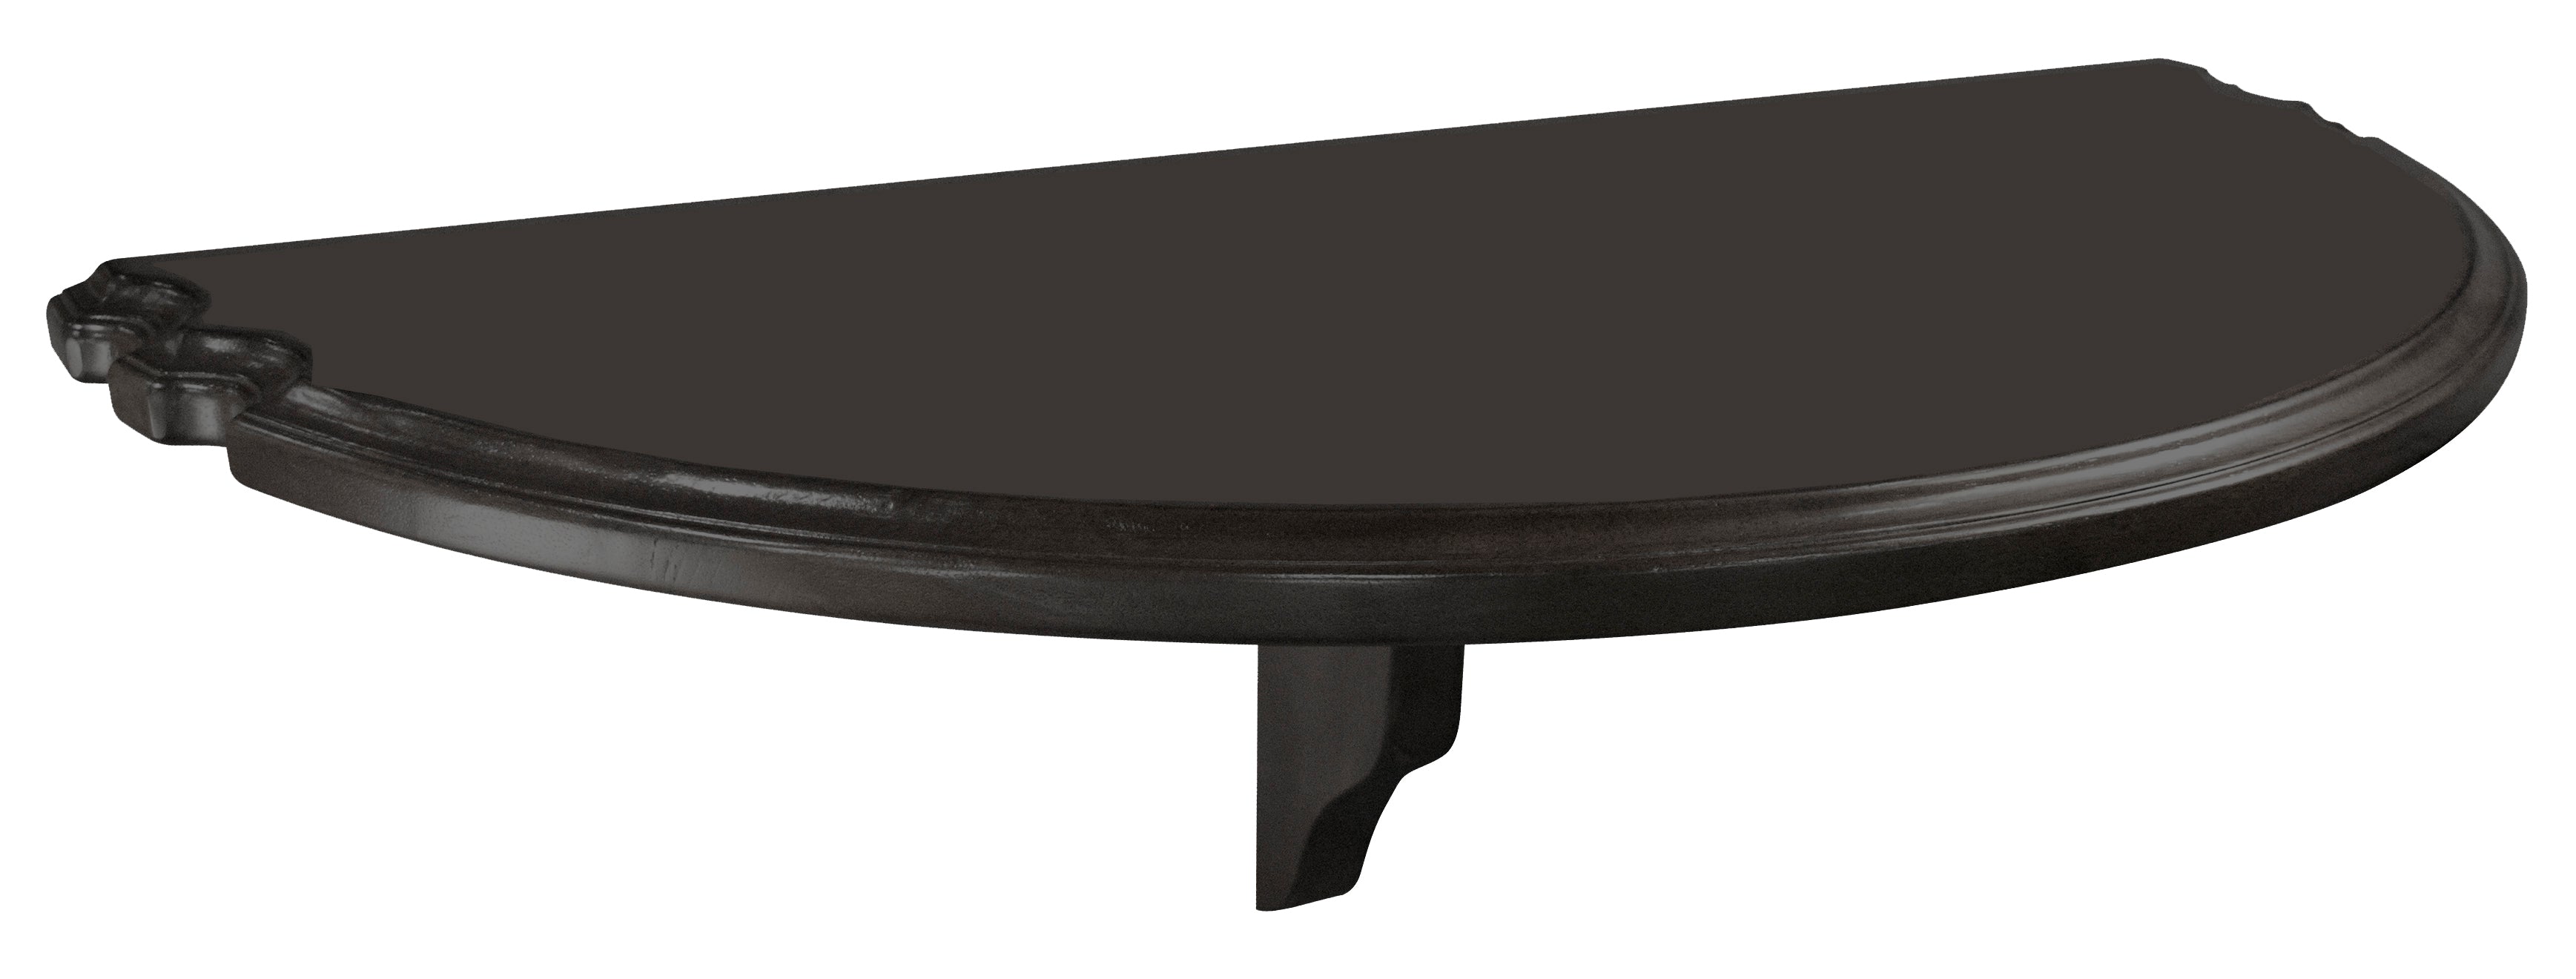 Legacy Billiards Oversized Semi Circle Wall Shelf with Cue Notches in Graphite Finish